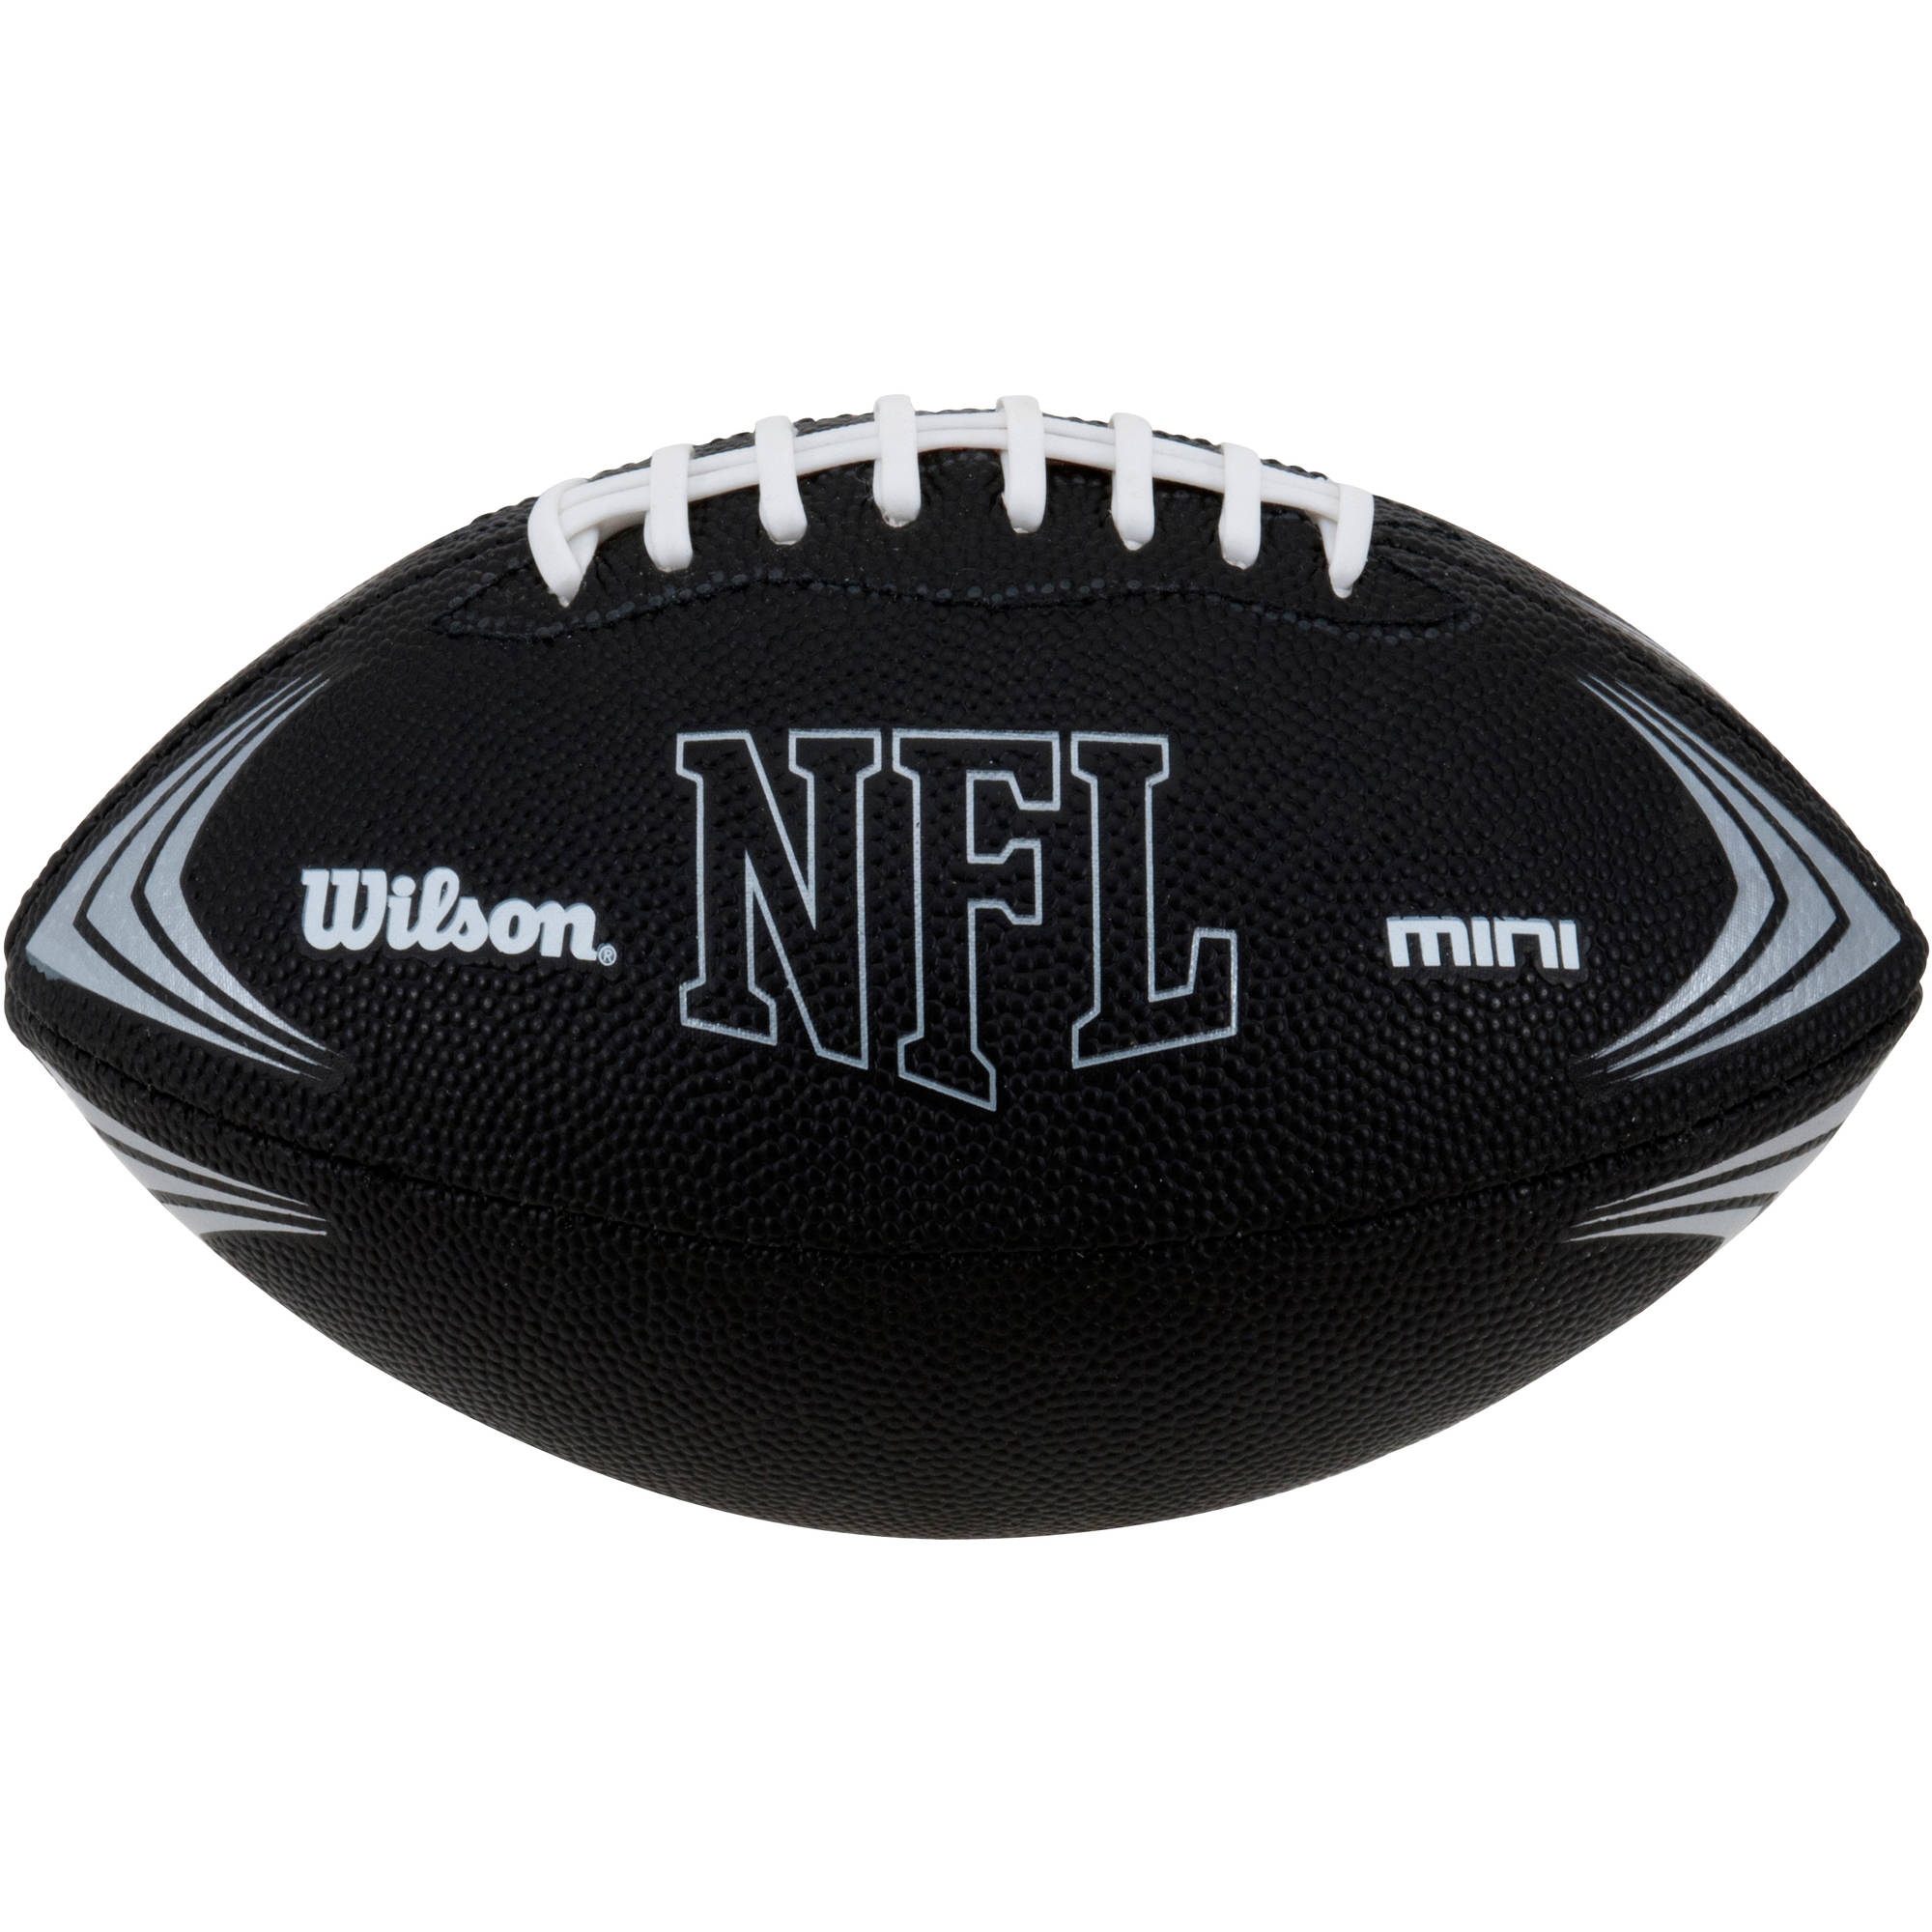 Wilson Sporting Goods NFL Mini Rubber Youth Football, Black - image 3 of 3